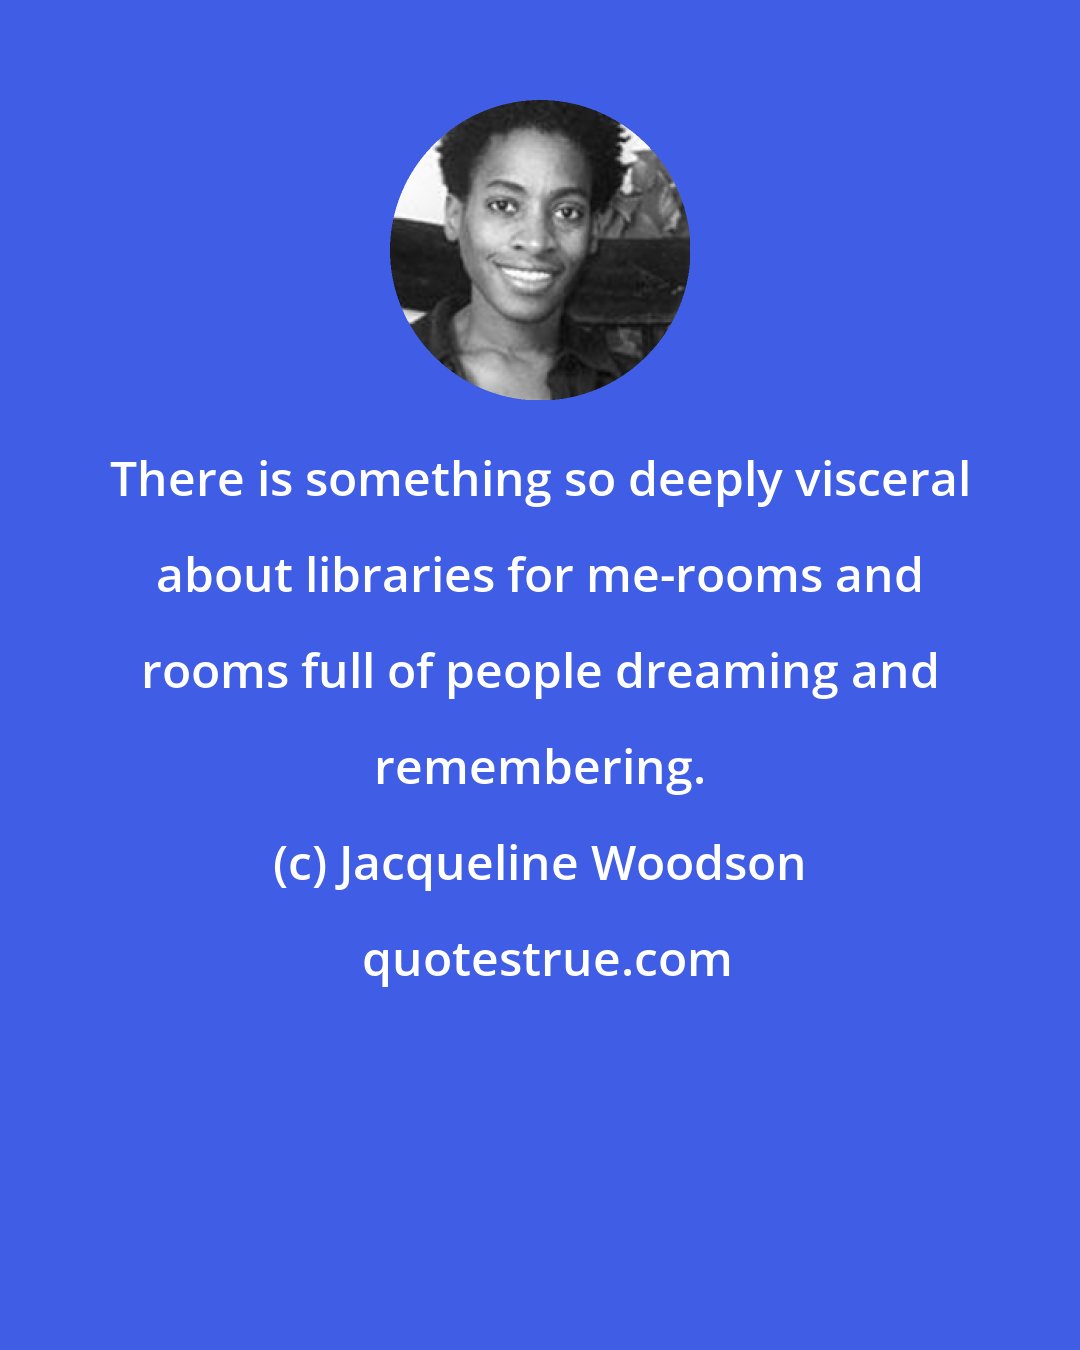 Jacqueline Woodson: There is something so deeply visceral about libraries for me-rooms and rooms full of people dreaming and remembering.